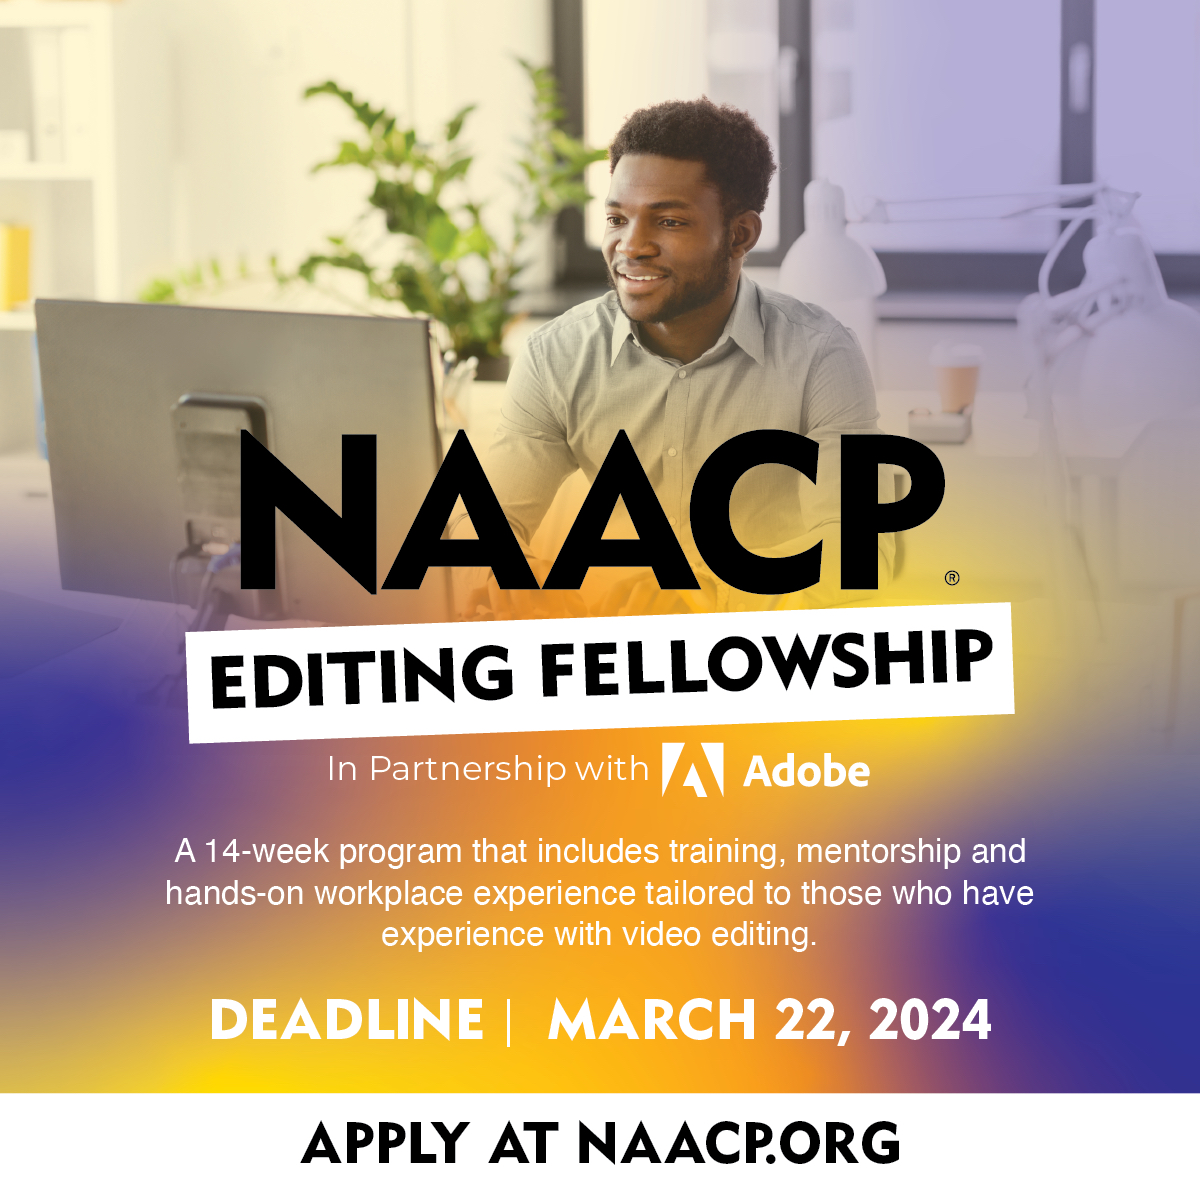 Calling all aspiring video editors! We have partnered with @Adobe to support the launch of a new Editing Fellowship program to increase diverse representation in the post-production industry. Learn more and apply today: bit.ly/420onCg.